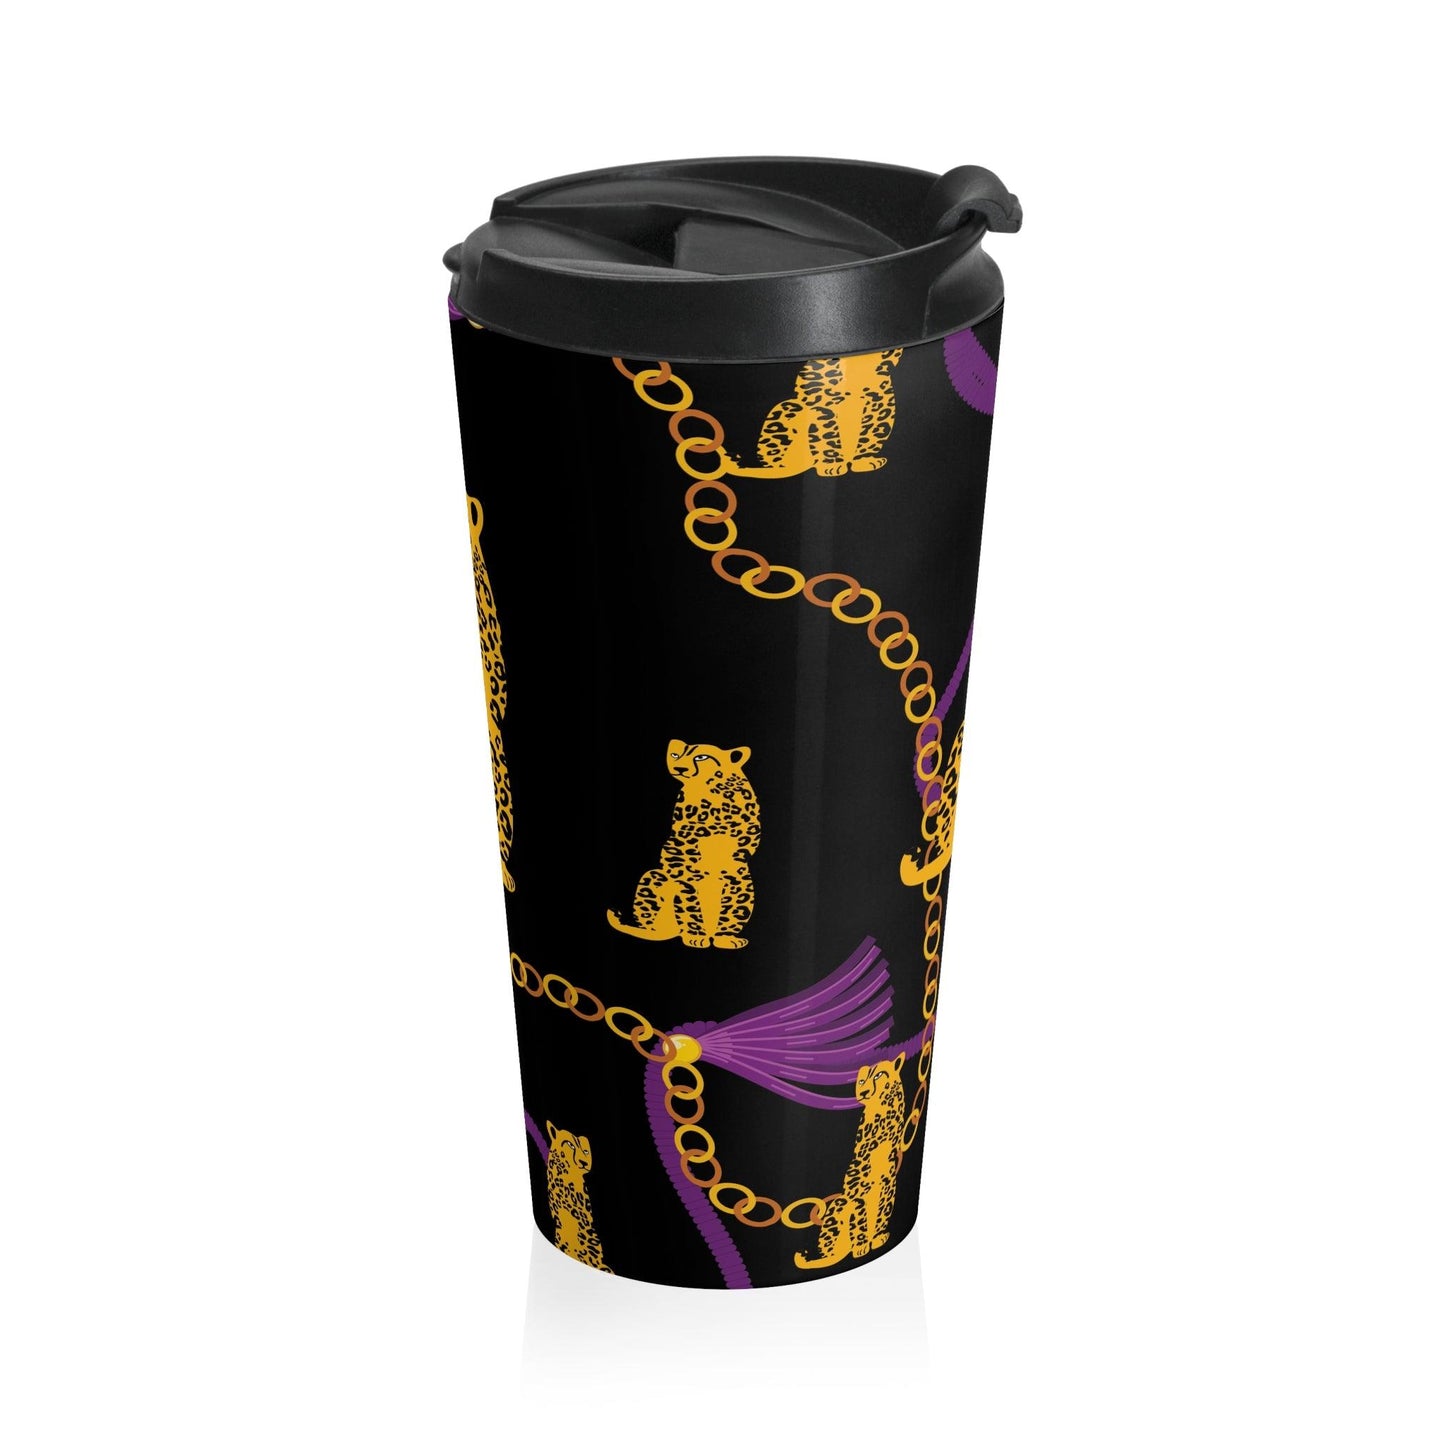 Leopard and Gold Chain Black Stainless Steel Travel Mug - MAIA HOMES